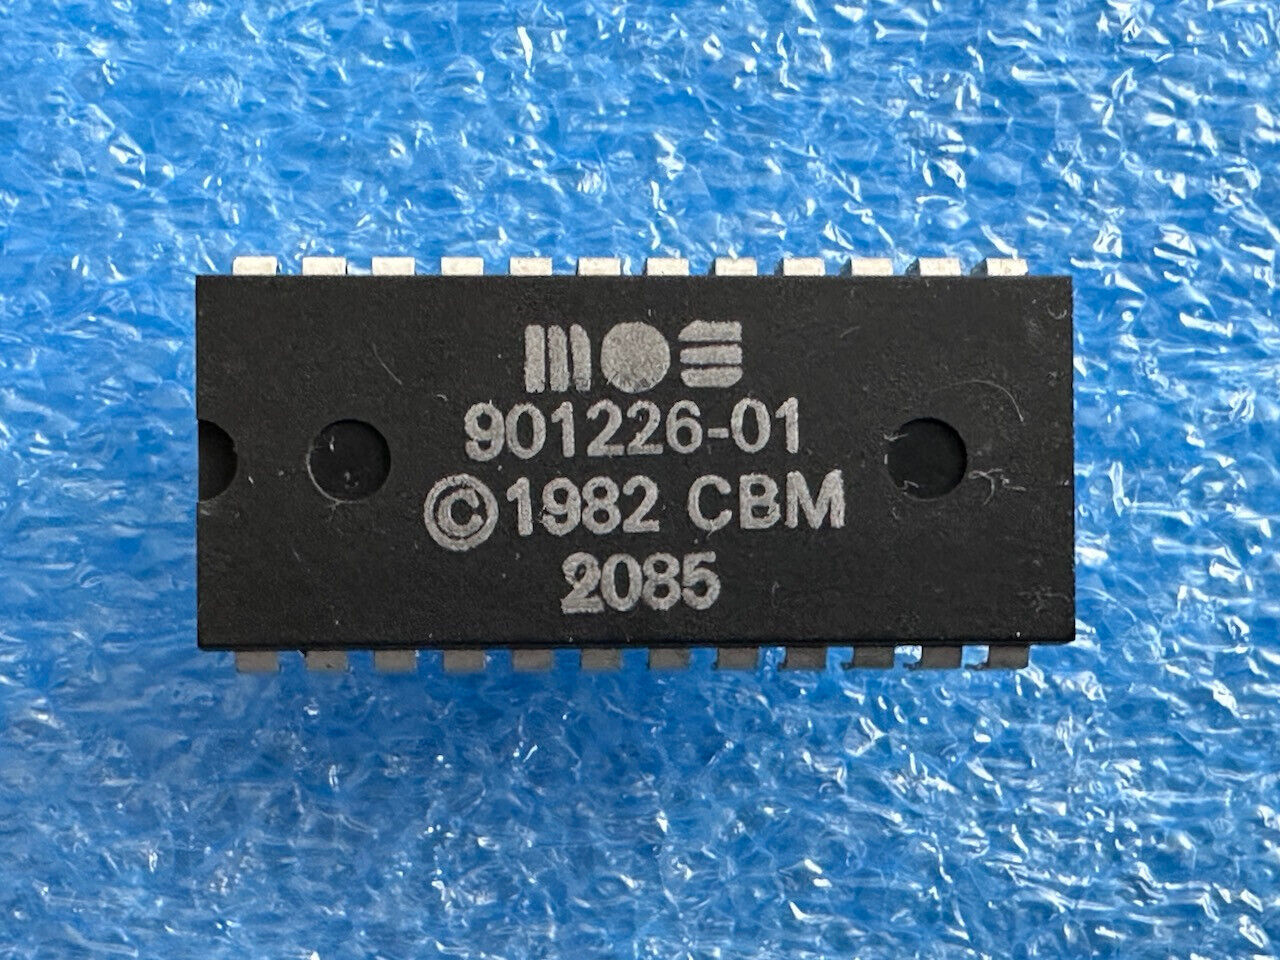 Mos 901226-01 Character ROM Chip Ic for Commodore C64 / / Cbm / 2 X